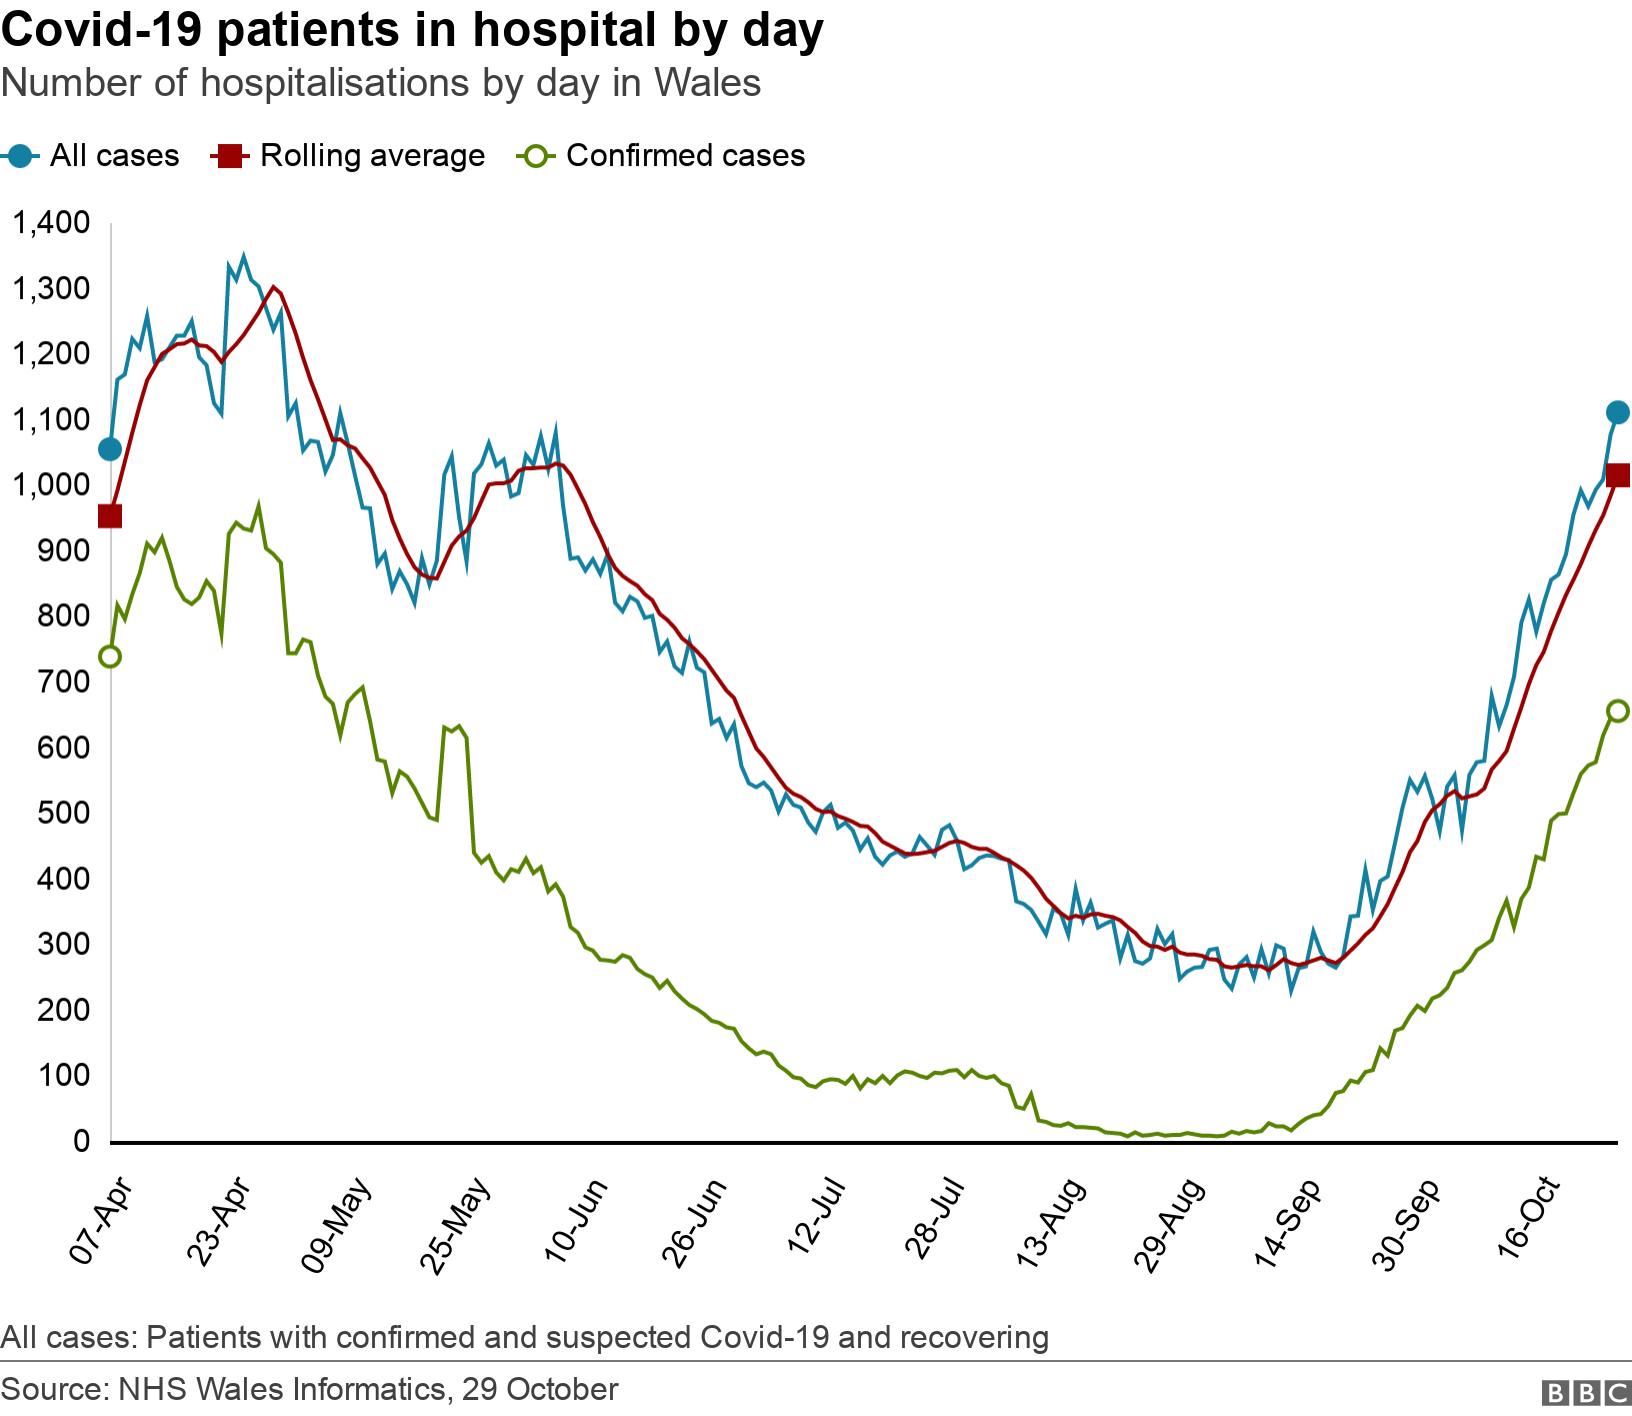 Covid-19 patients in hospital by day. Number of hospitalisations by day in Wales. All cases: Patients with confirmed and suspected Covid-19 and recovering.